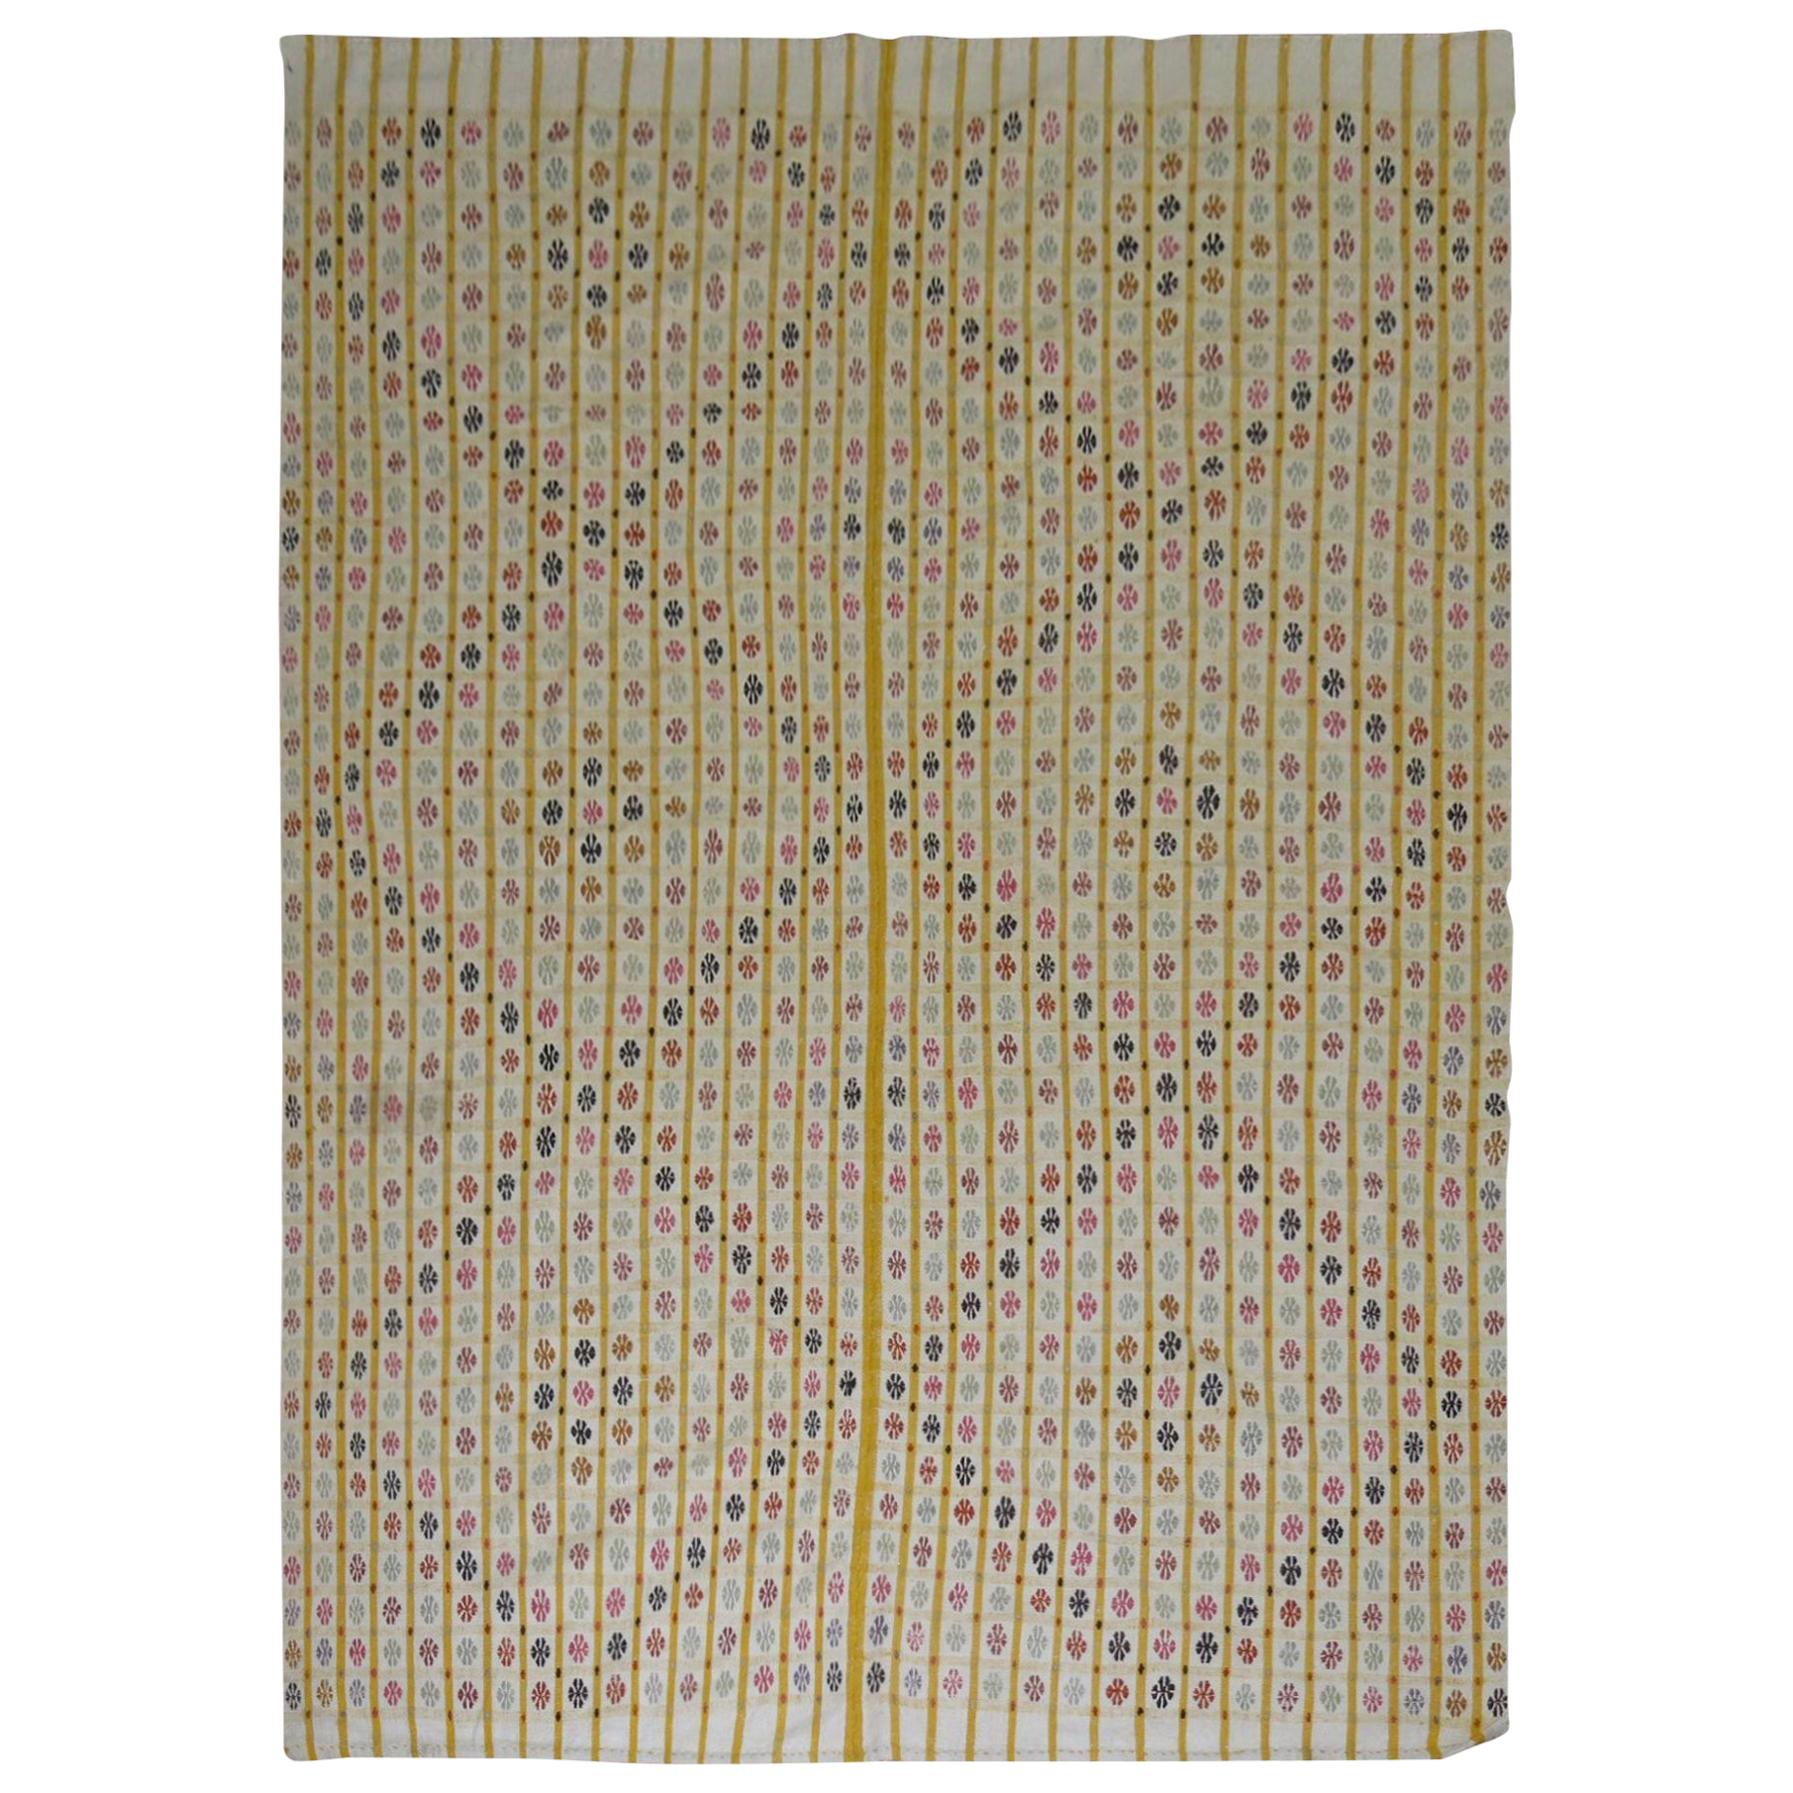 Turkish Cicim Flat-Weave or Blanket, 20th Century For Sale